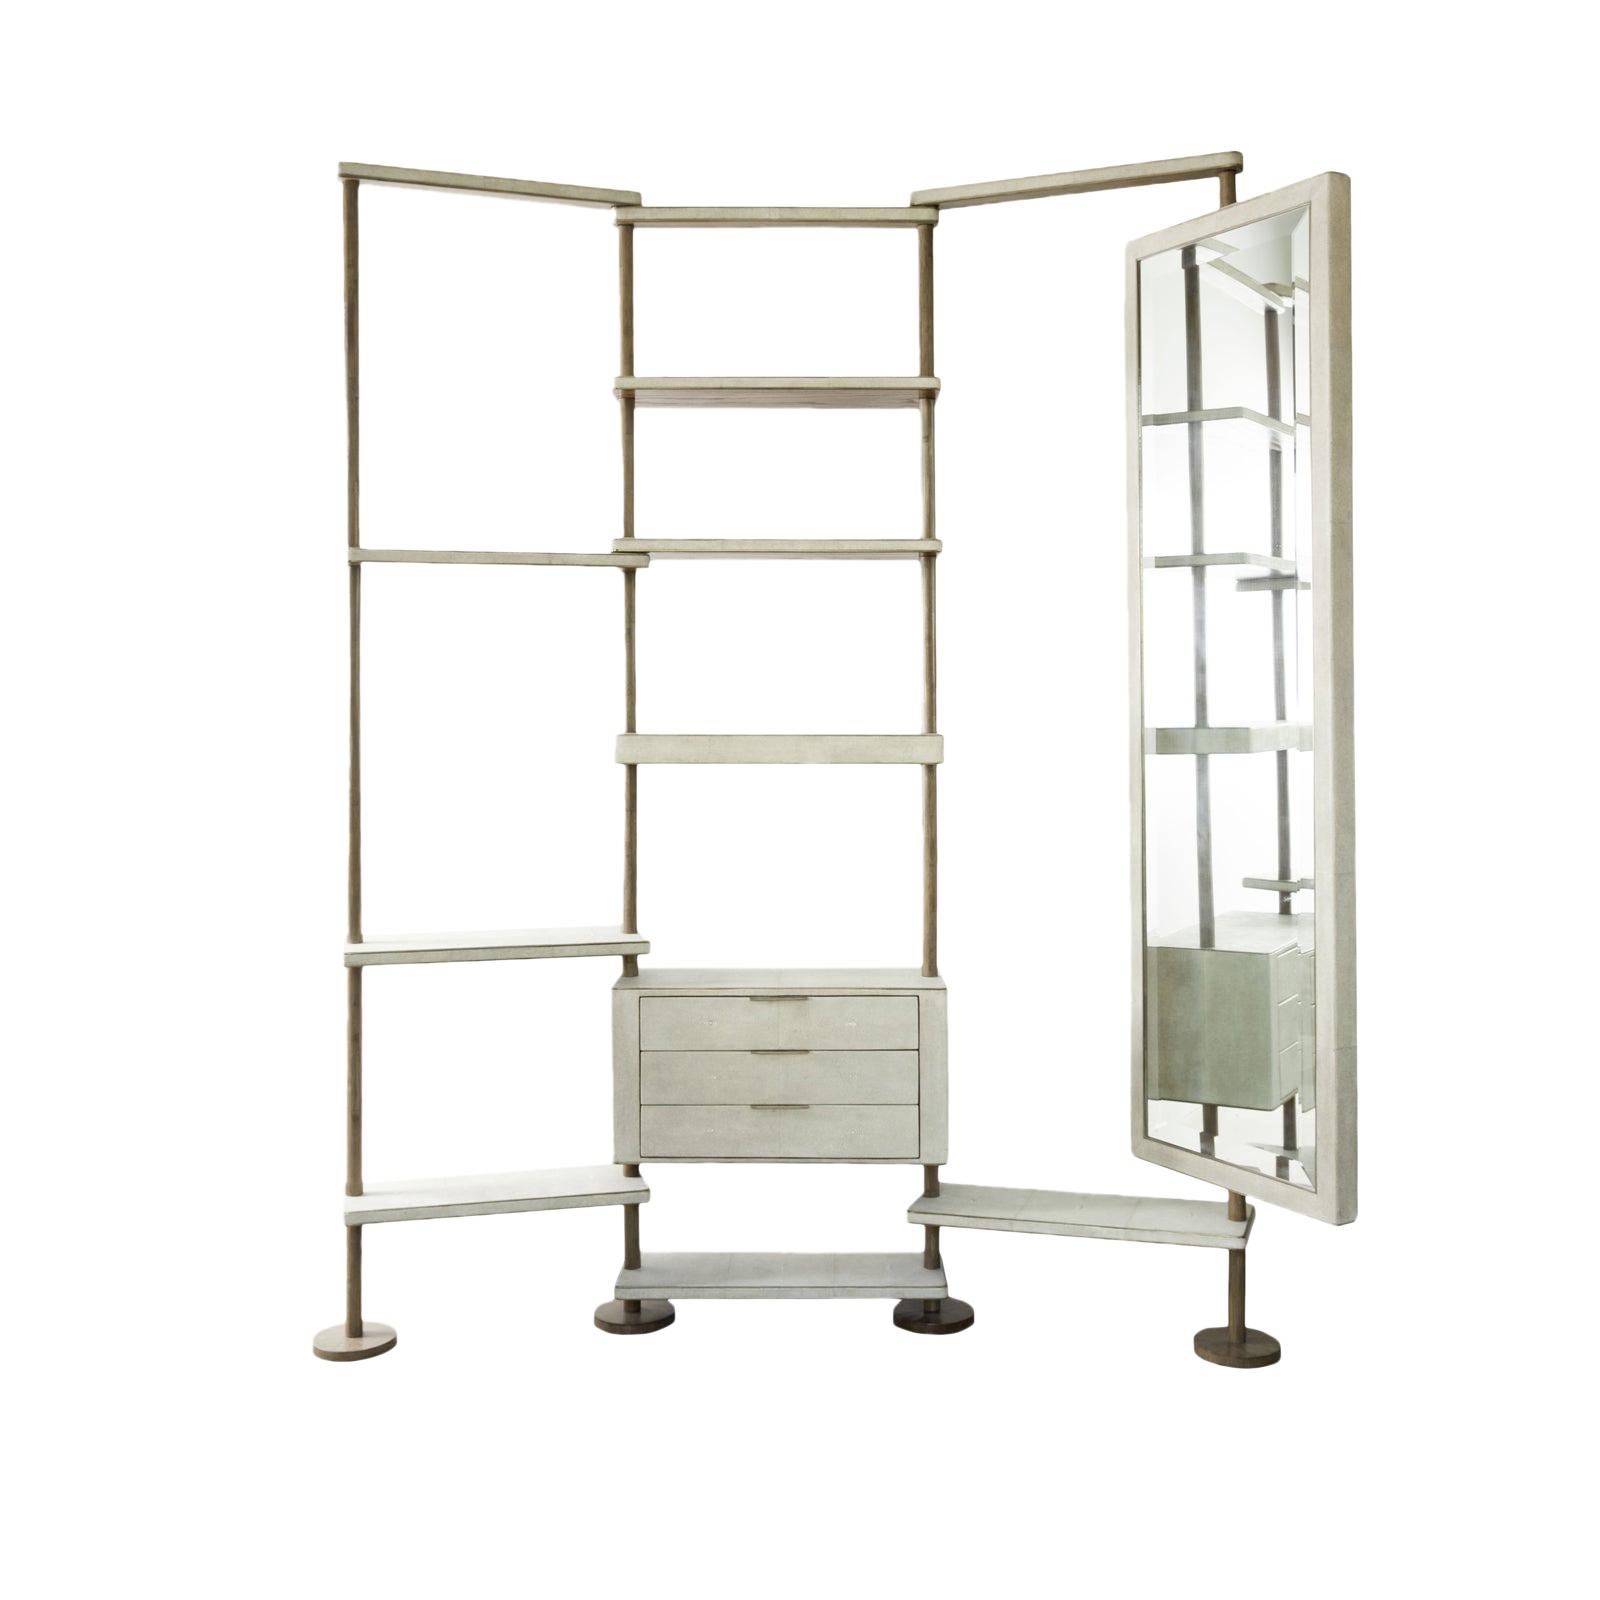 Rotating Shelving Unit with Full Body Mirror in Cream Shagreen by Kifu Paris For Sale